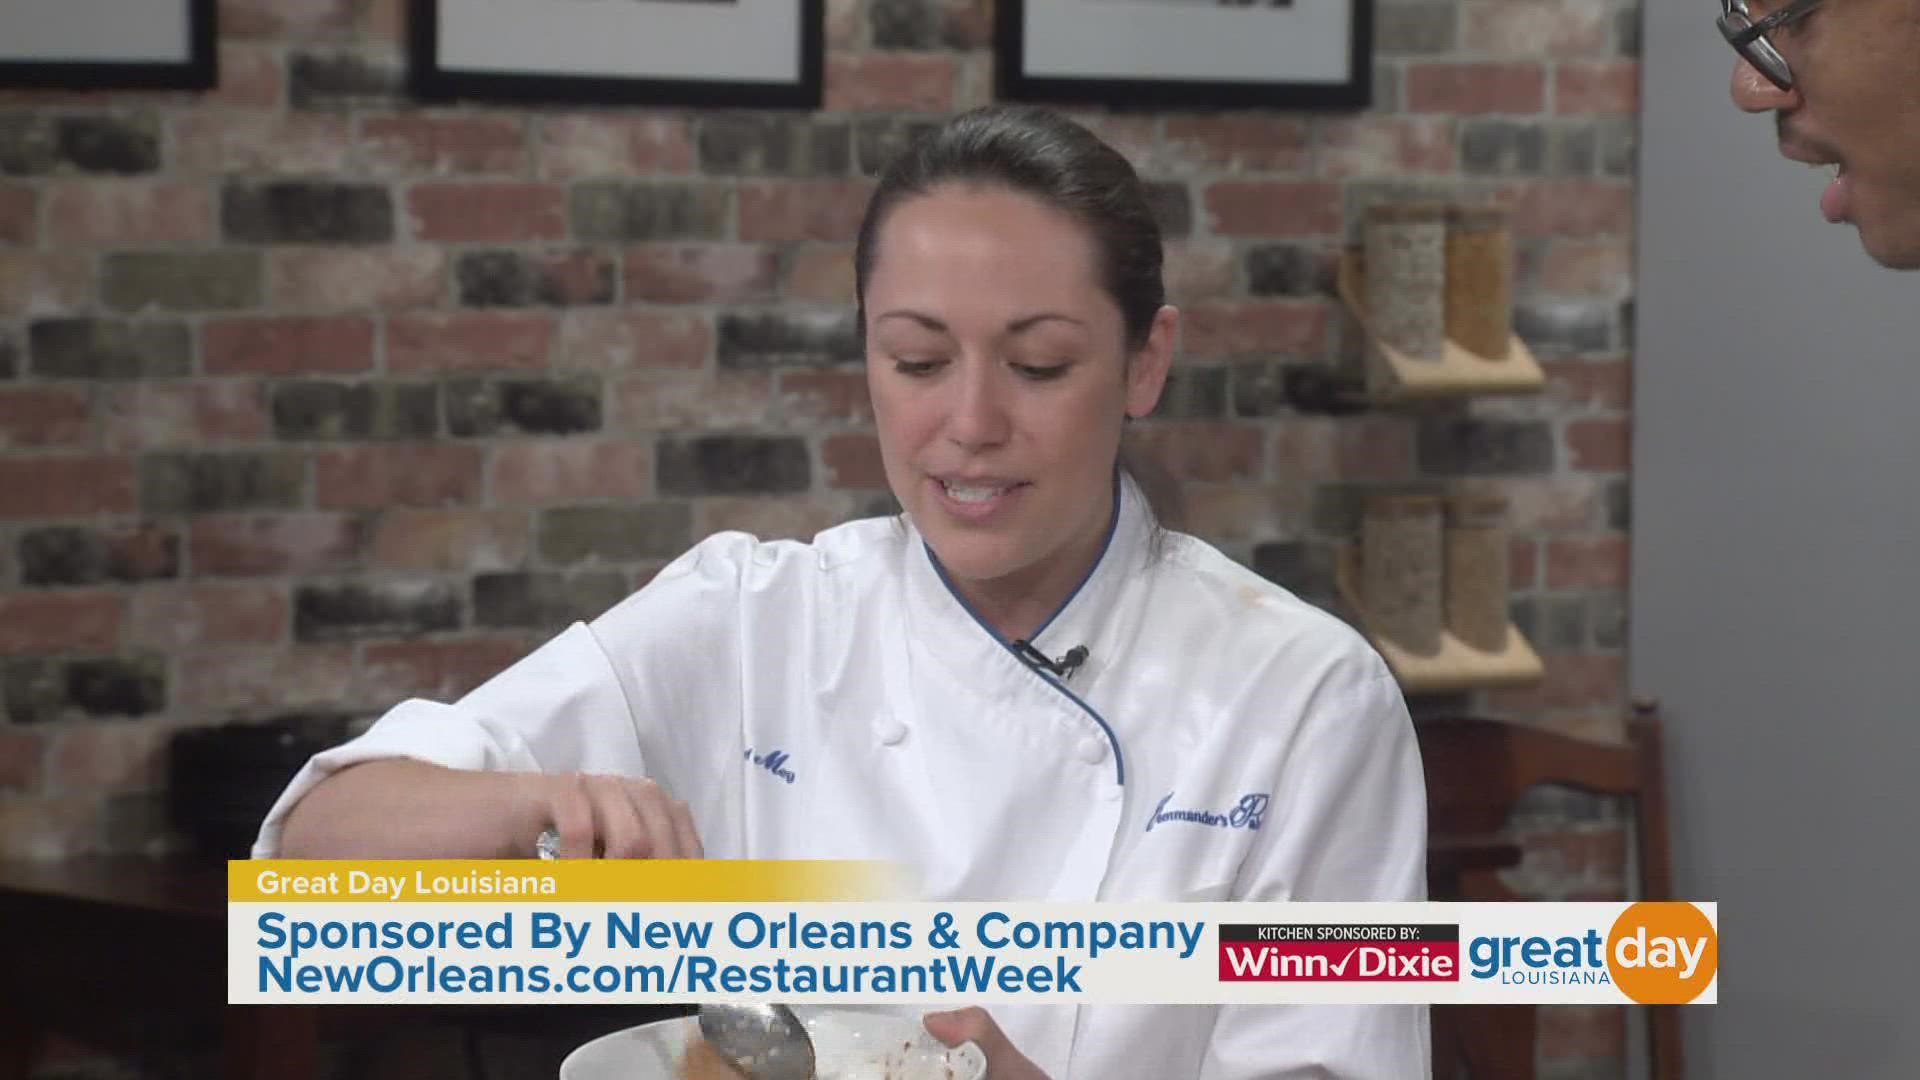 Executive Chef Meg Bickford joined us in the kitchen to share some dishes from the Commander's Palace restaurant week menu.